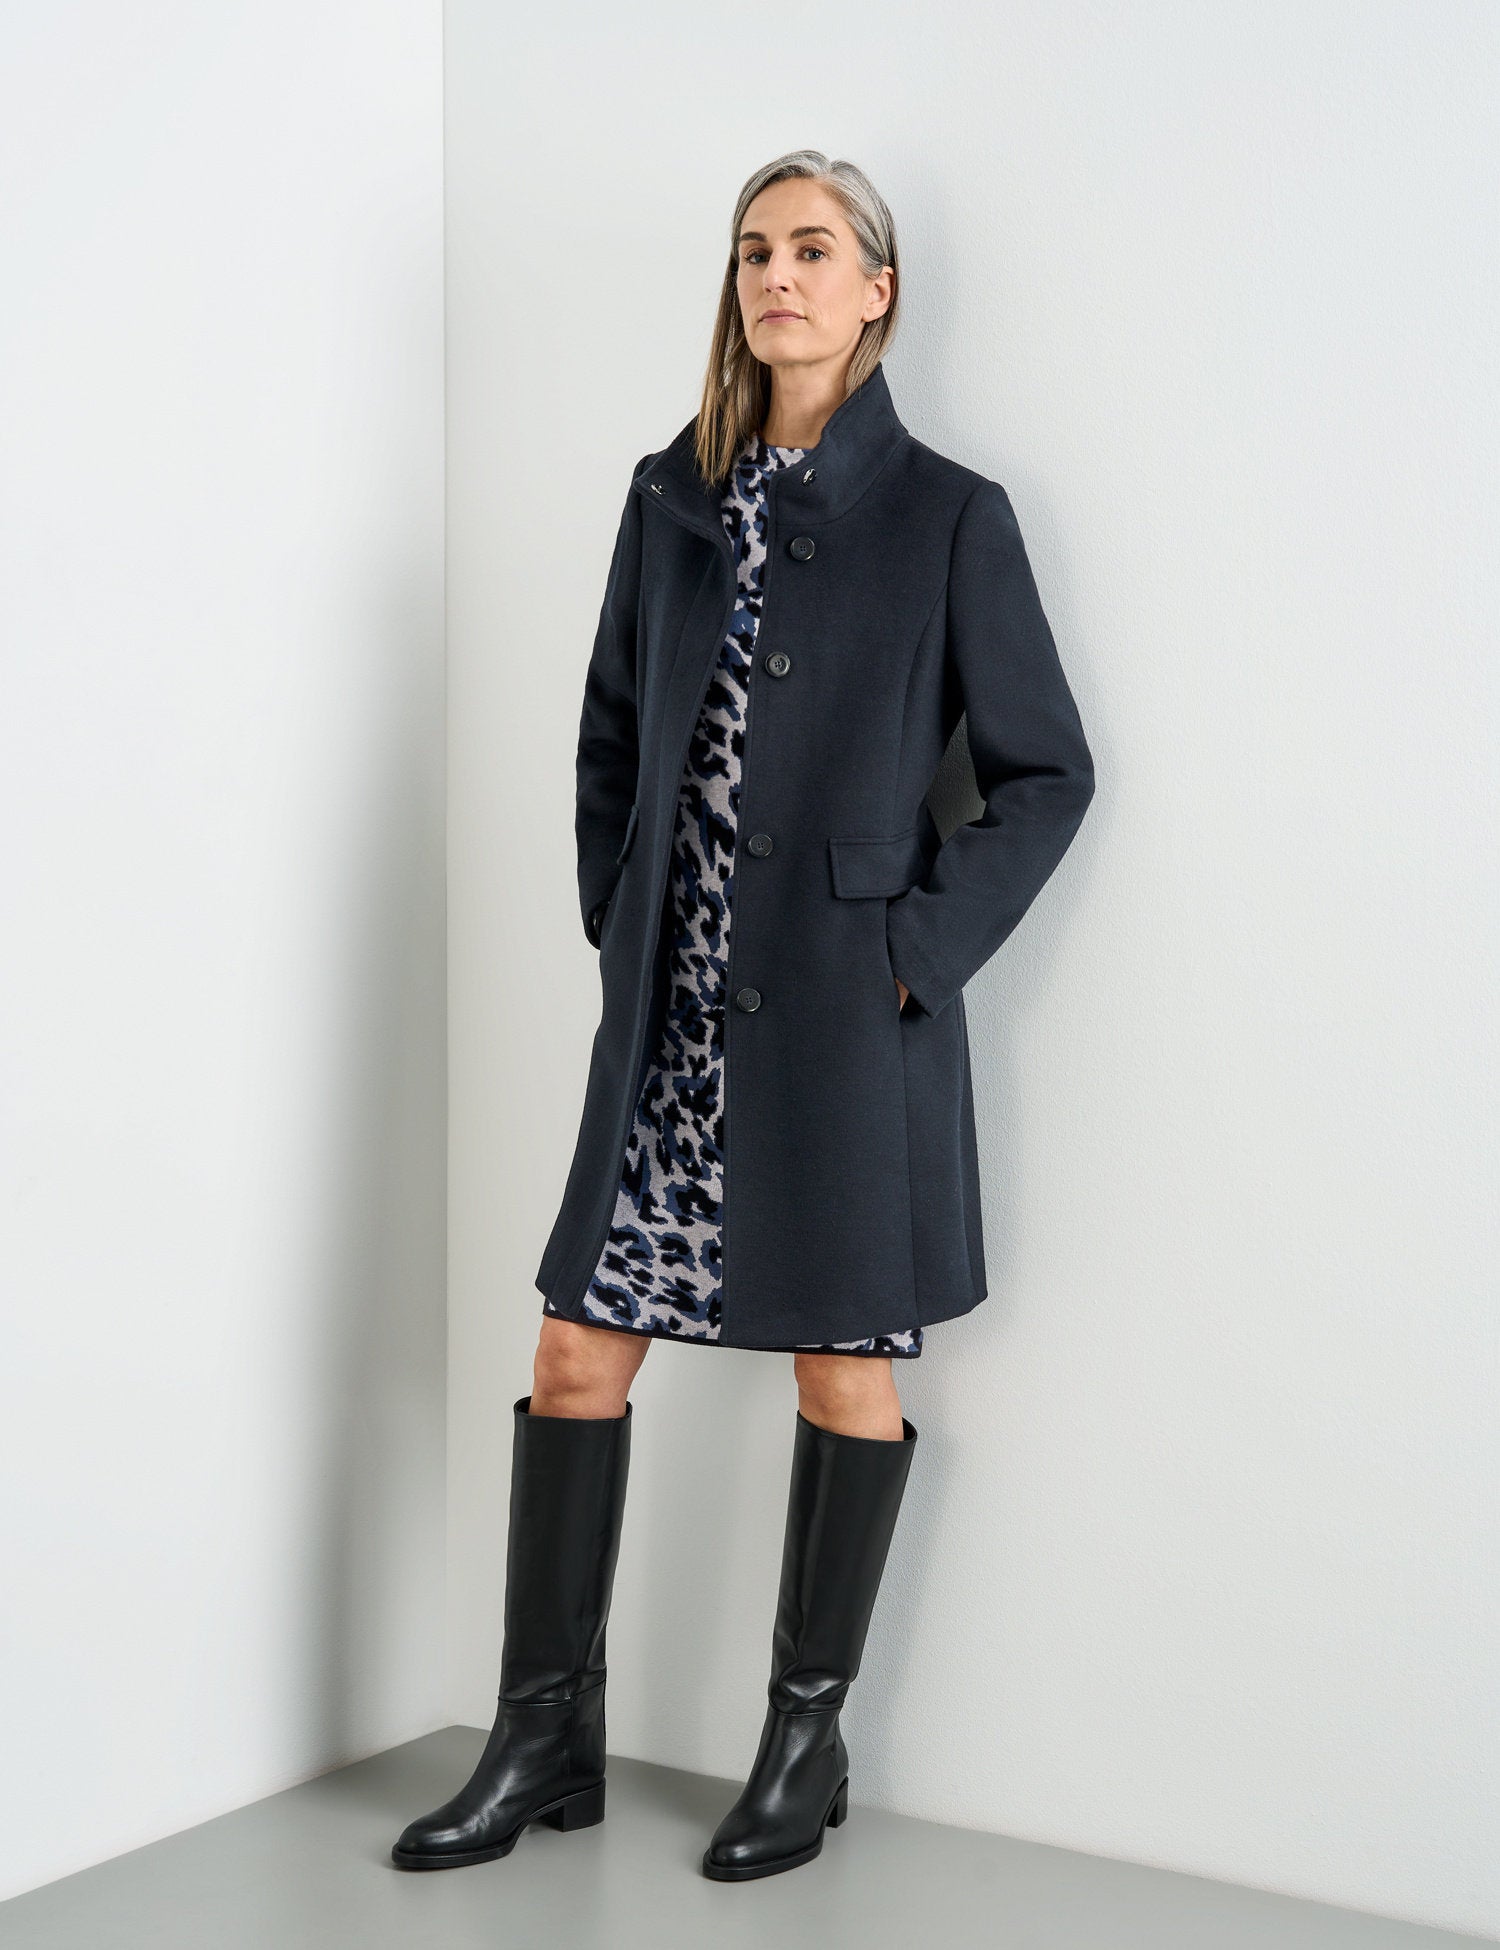 Short Wool Coat With A Stand Up Collar_250235-31131_80880_05